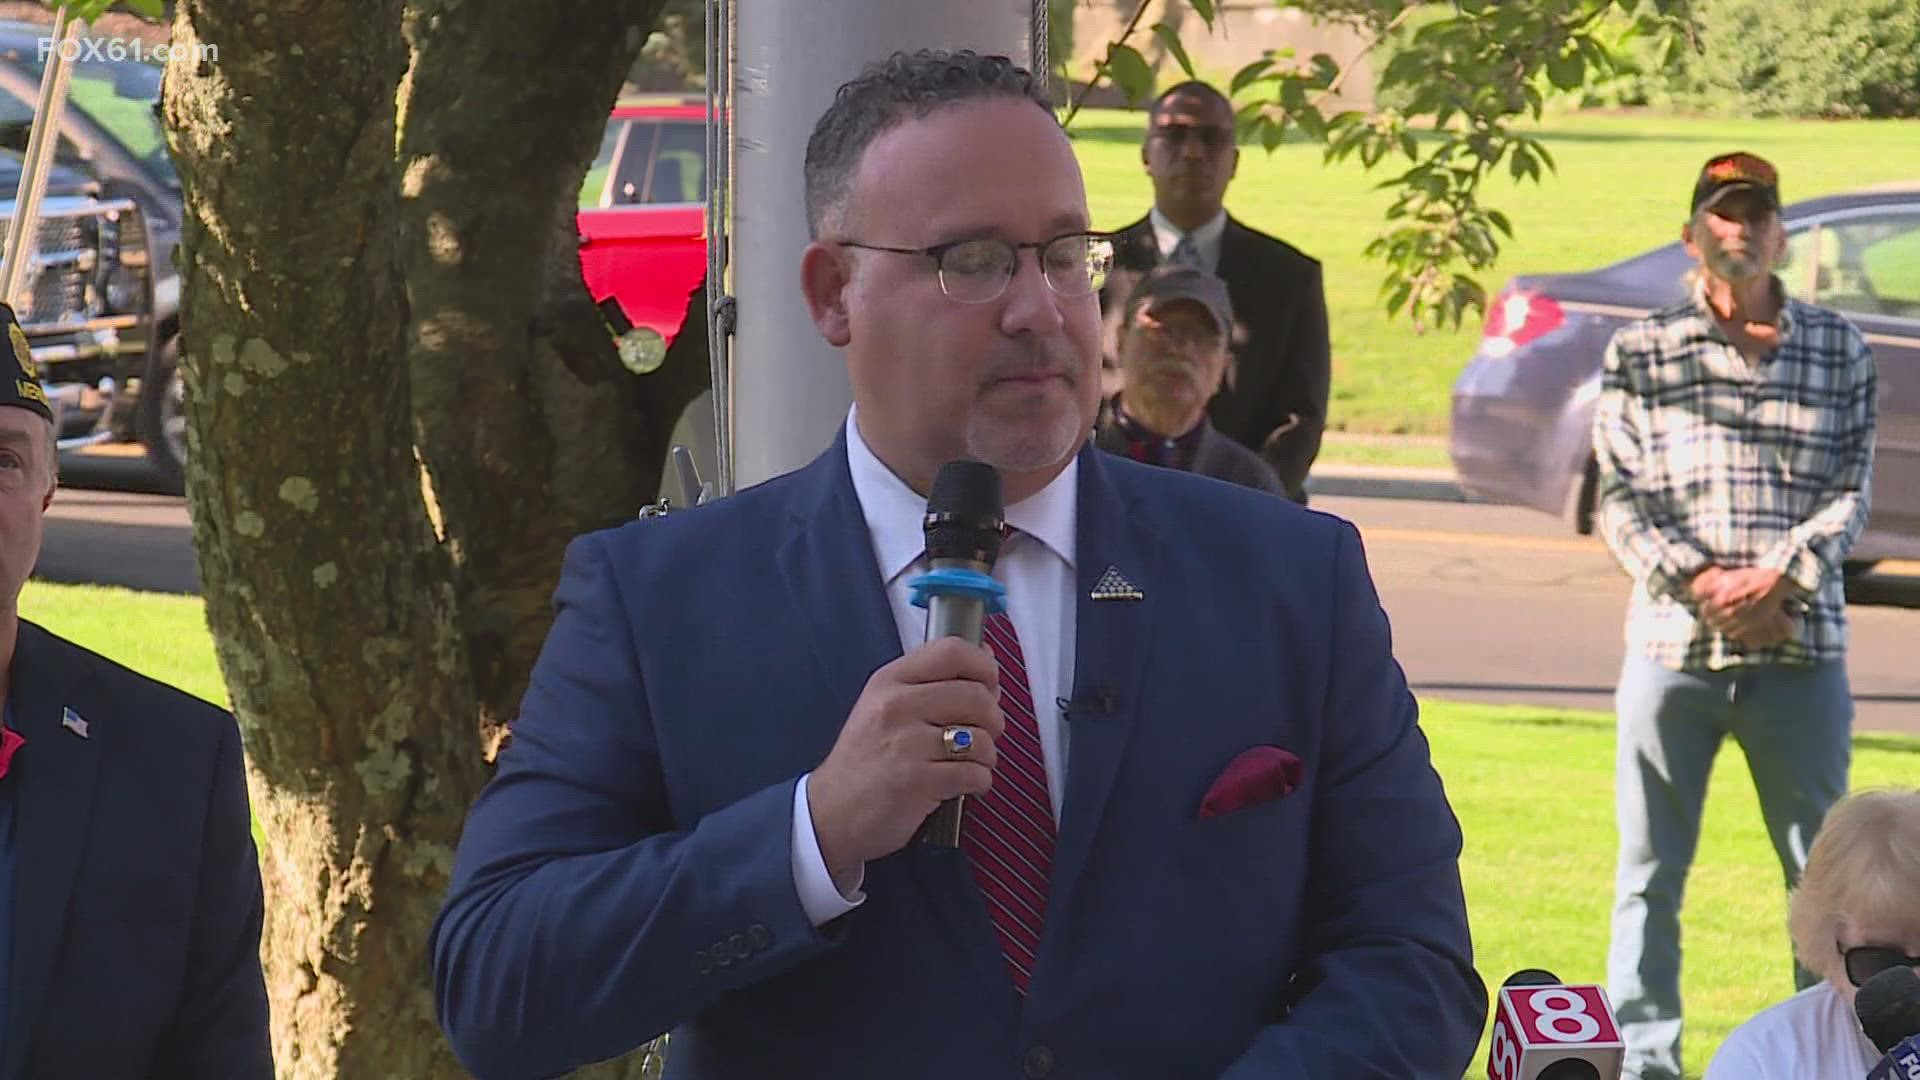 The Meriden-native was joined by local leaders and neighbors to reflect on the 20th anniversary of the 9/11 terror attacks.